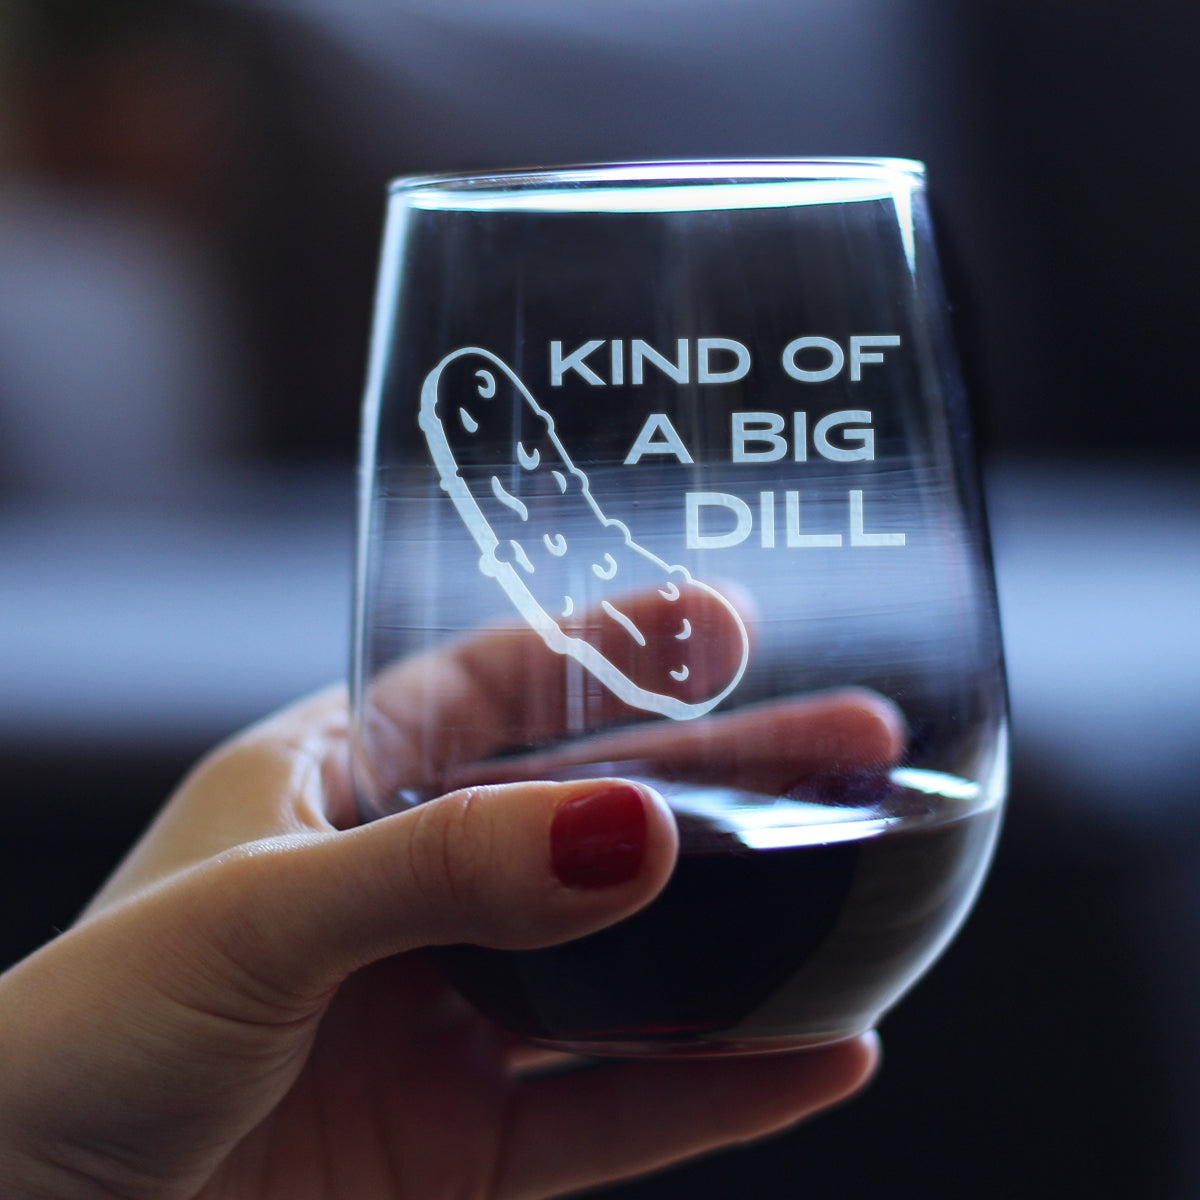 Kind of a Big Dill – Stemless Wine Glass - Funny Pickle Gift, Large Glasses, Etched Sayings, Gift Box